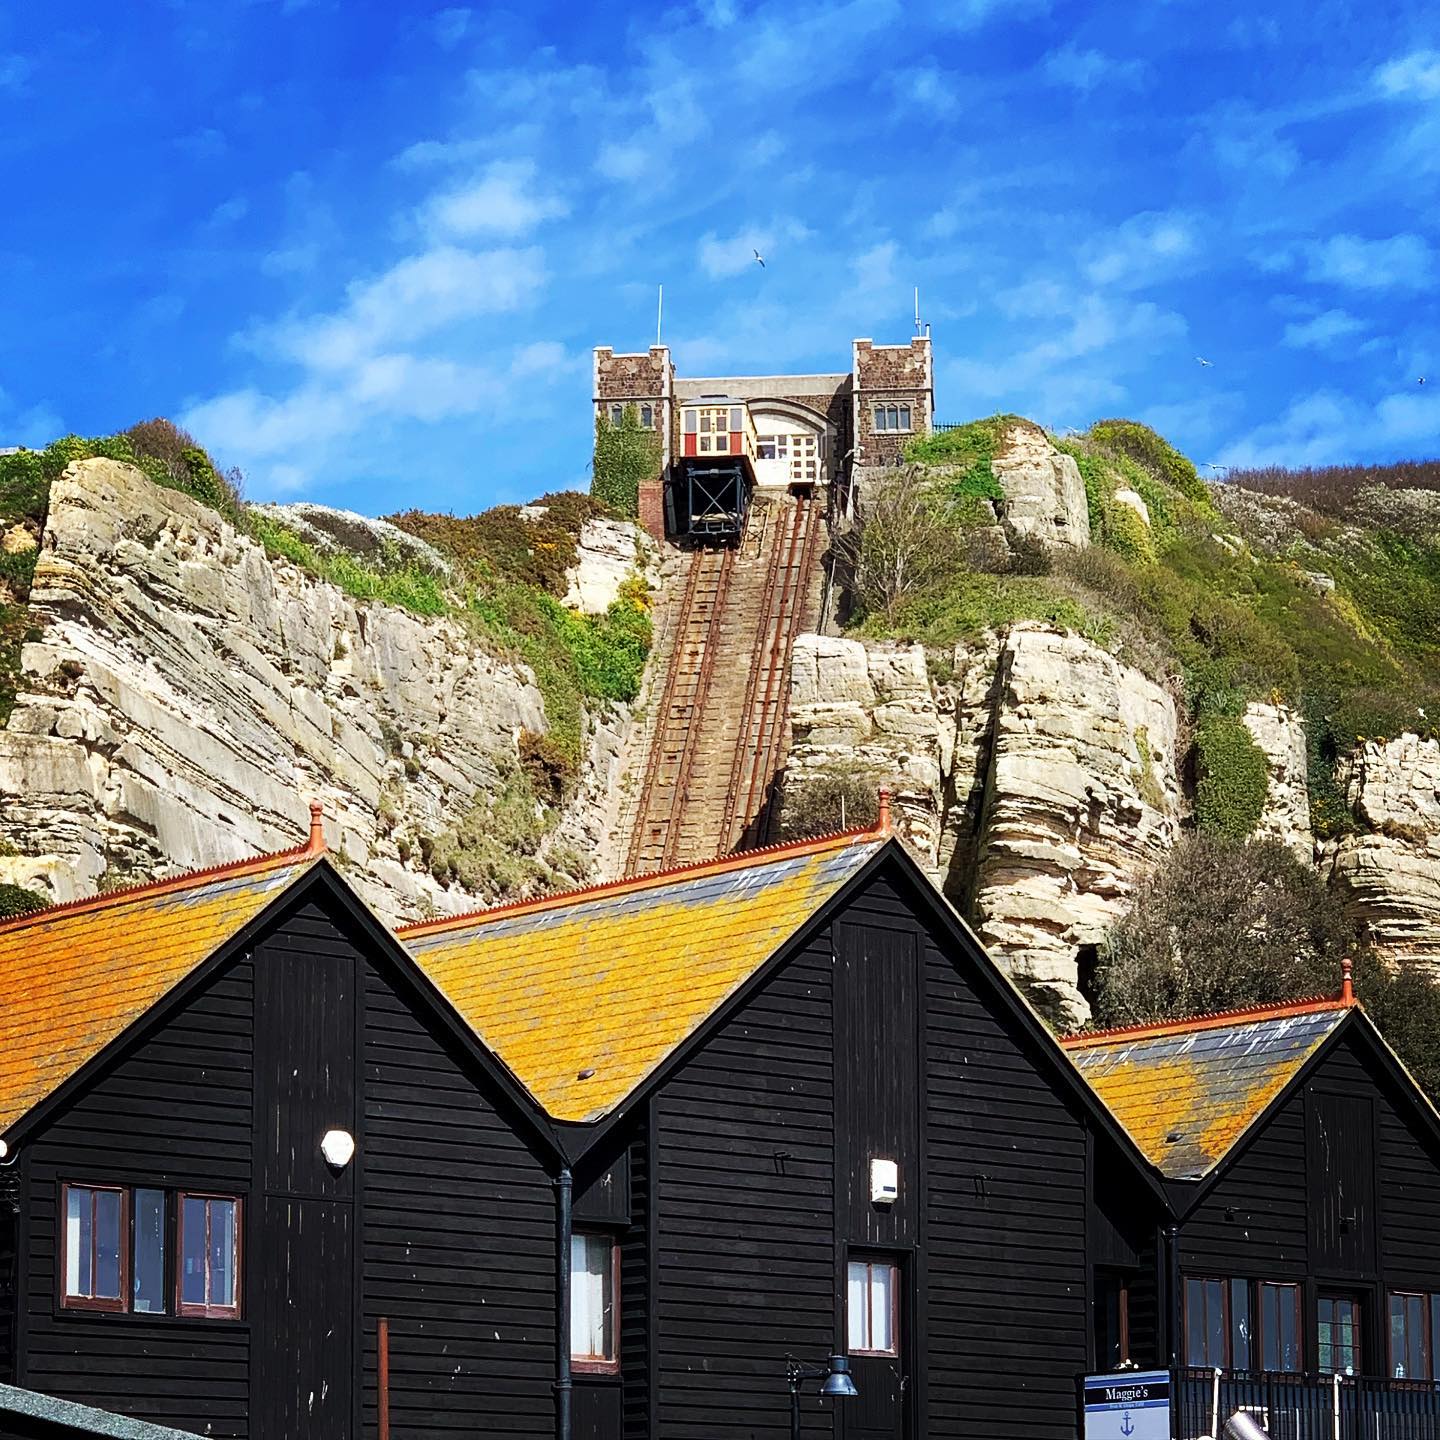 Standing on the beach amongst lobster pots, fishing boats, buoys, old rope and tarpaulin flapping gently in the breeze, looking up across the fish market to the East Hill and the funicular railway.  #hastings #easthillfunicular #fishingindustry #daysout #besidethesea #rockanorefisheries